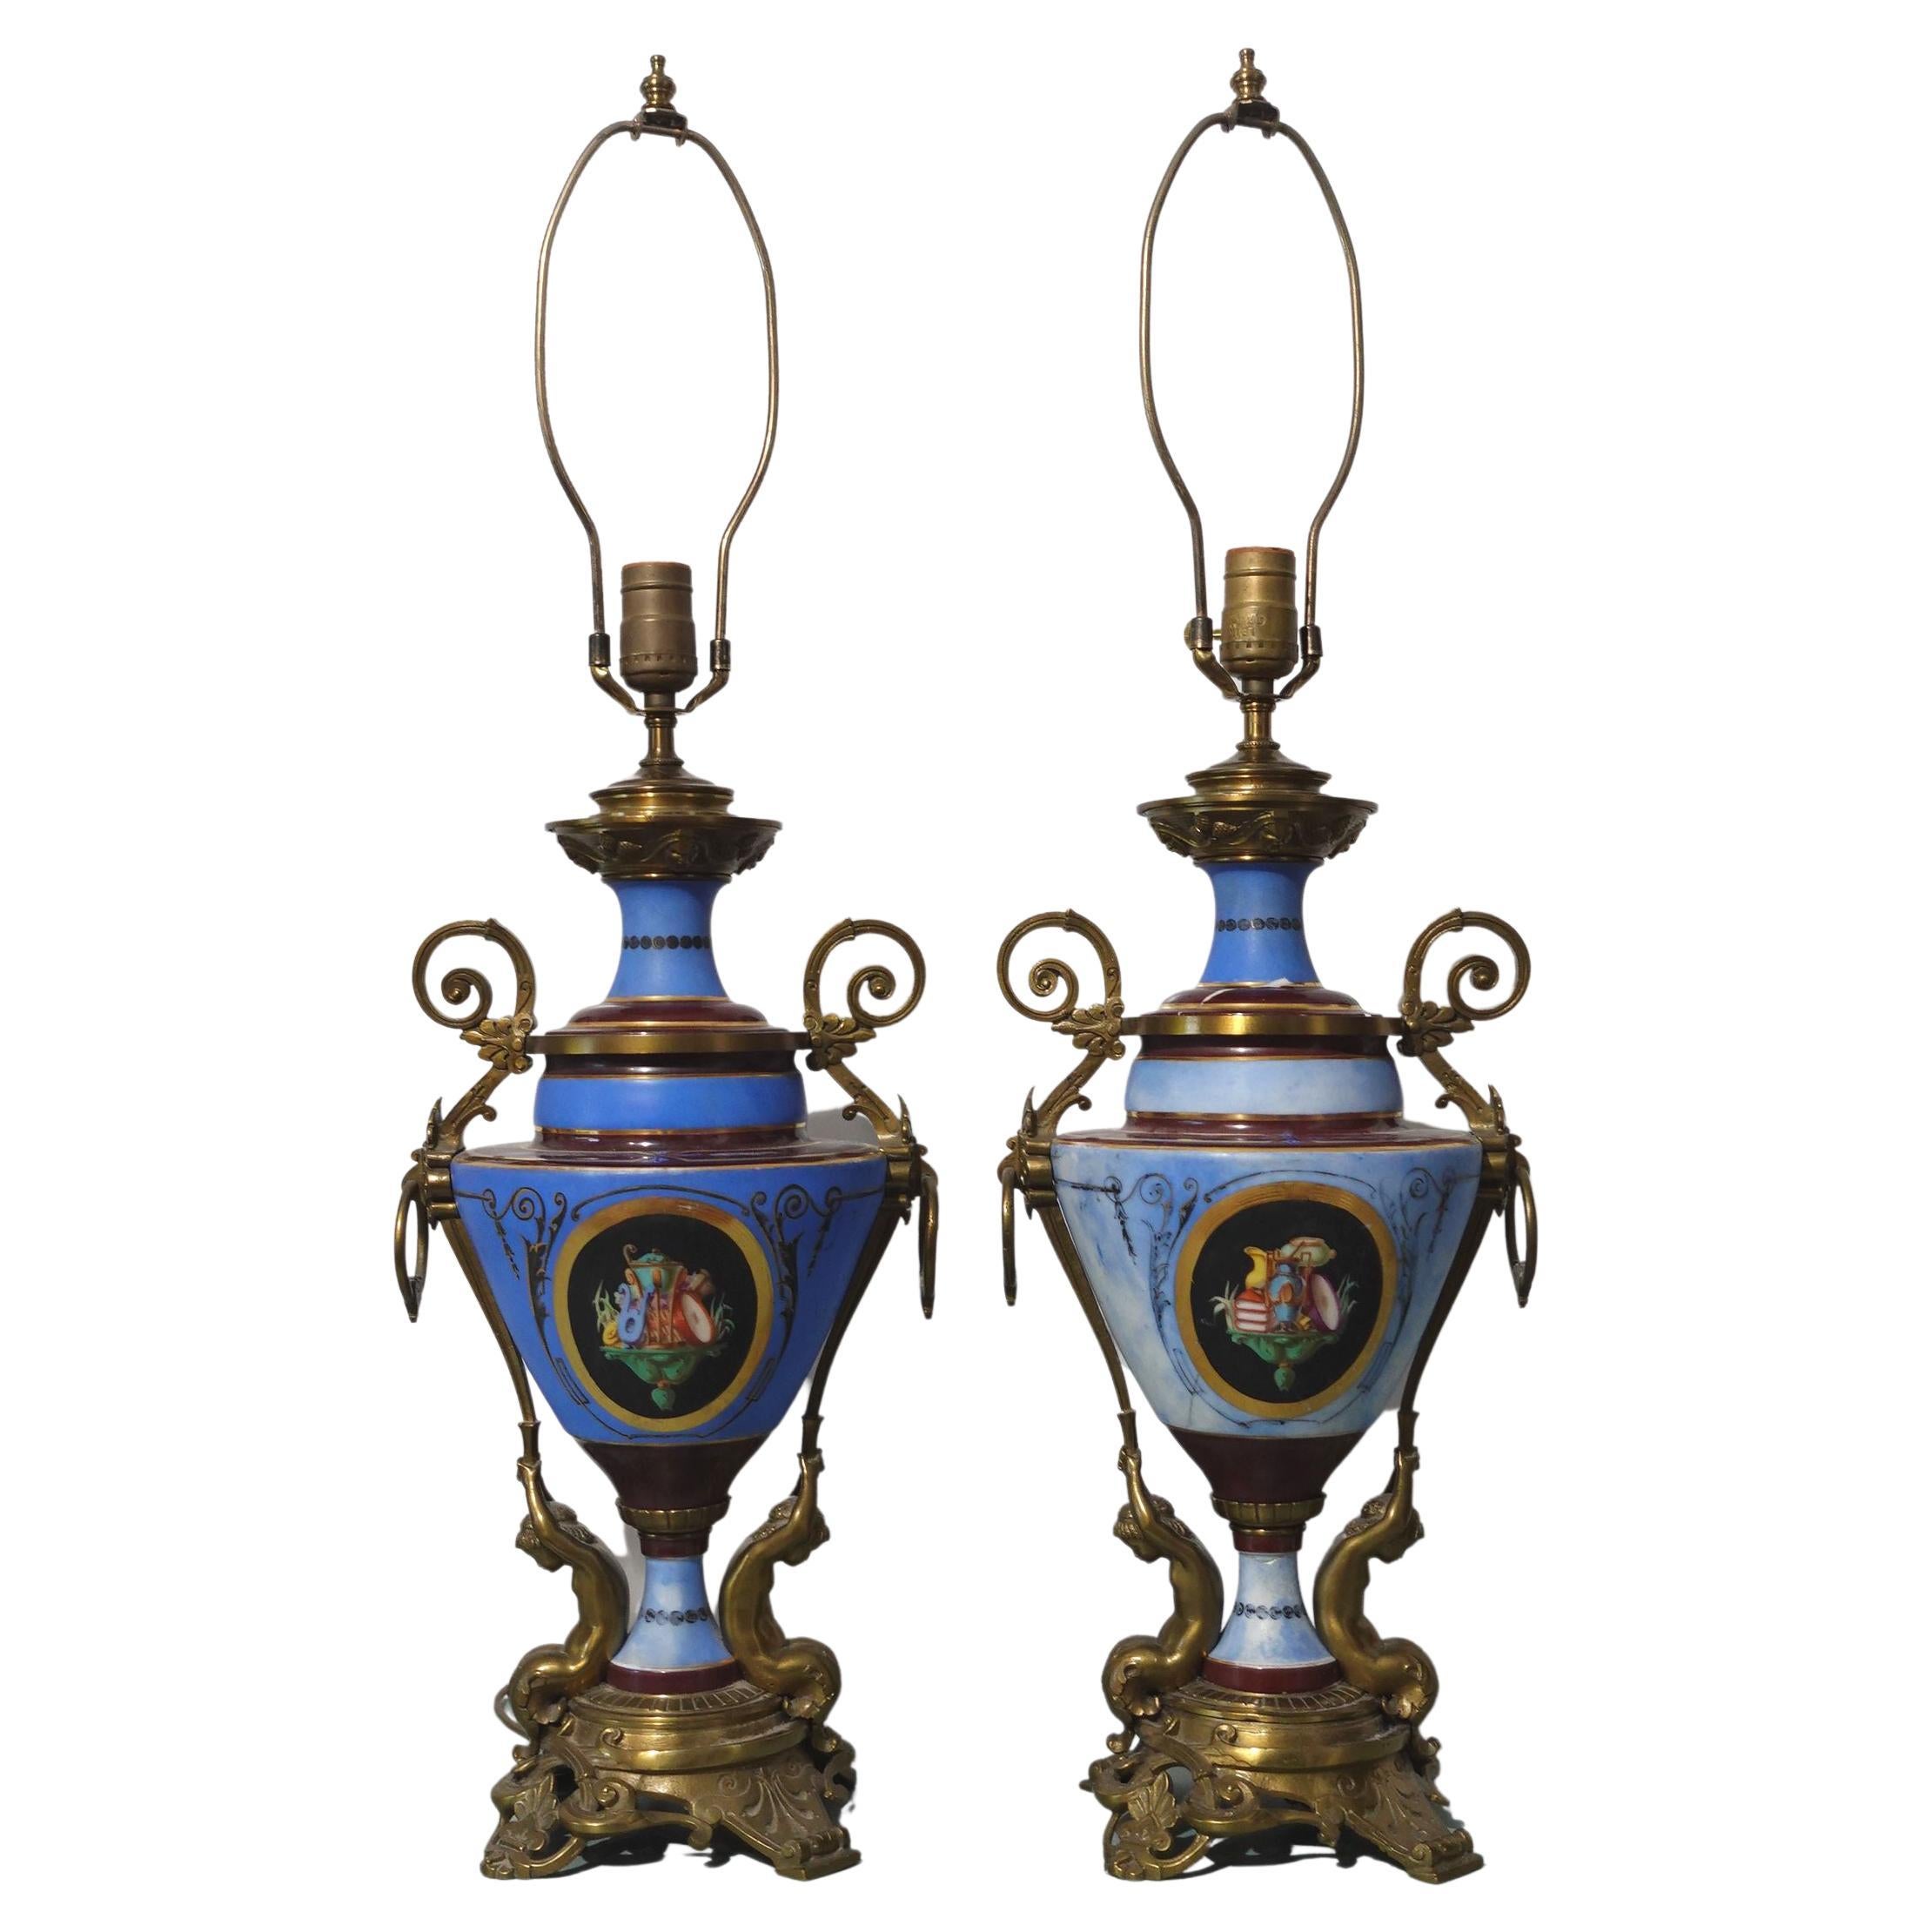 Pair of Neoclassical Style Porcelain and Gilt-Bronze Table Lamps